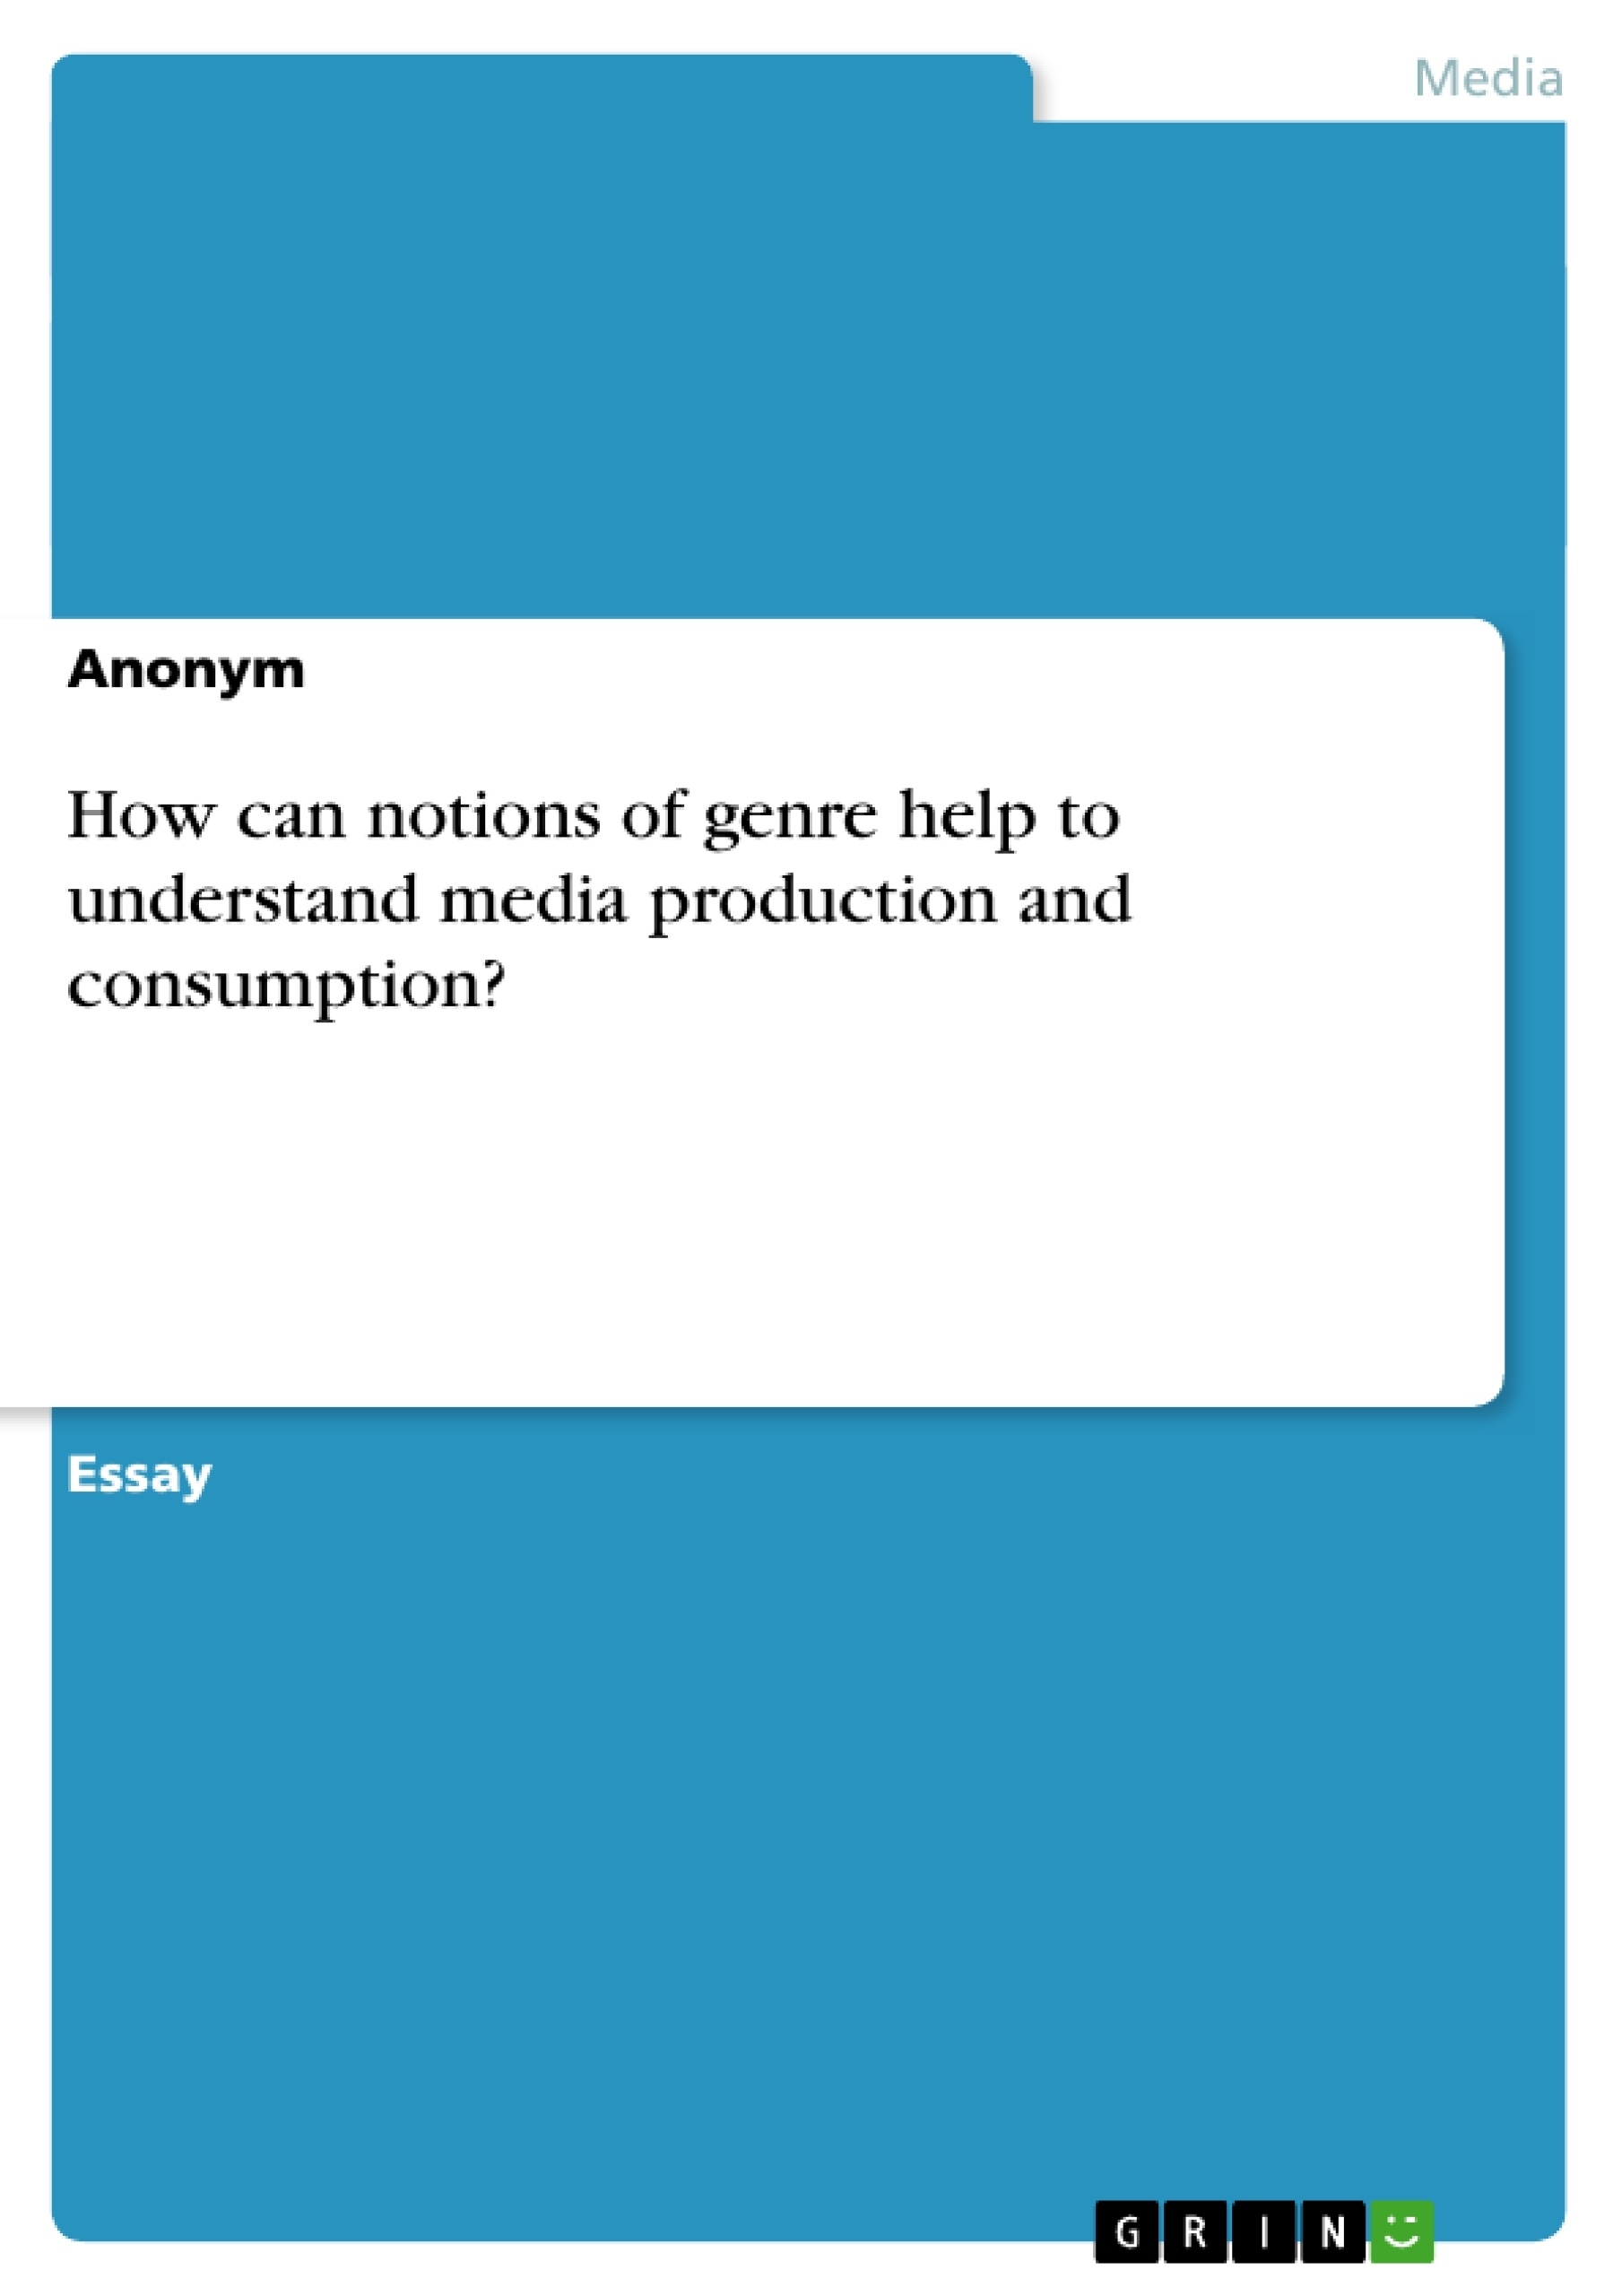 Title: How can notions of genre help to understand media production and consumption?